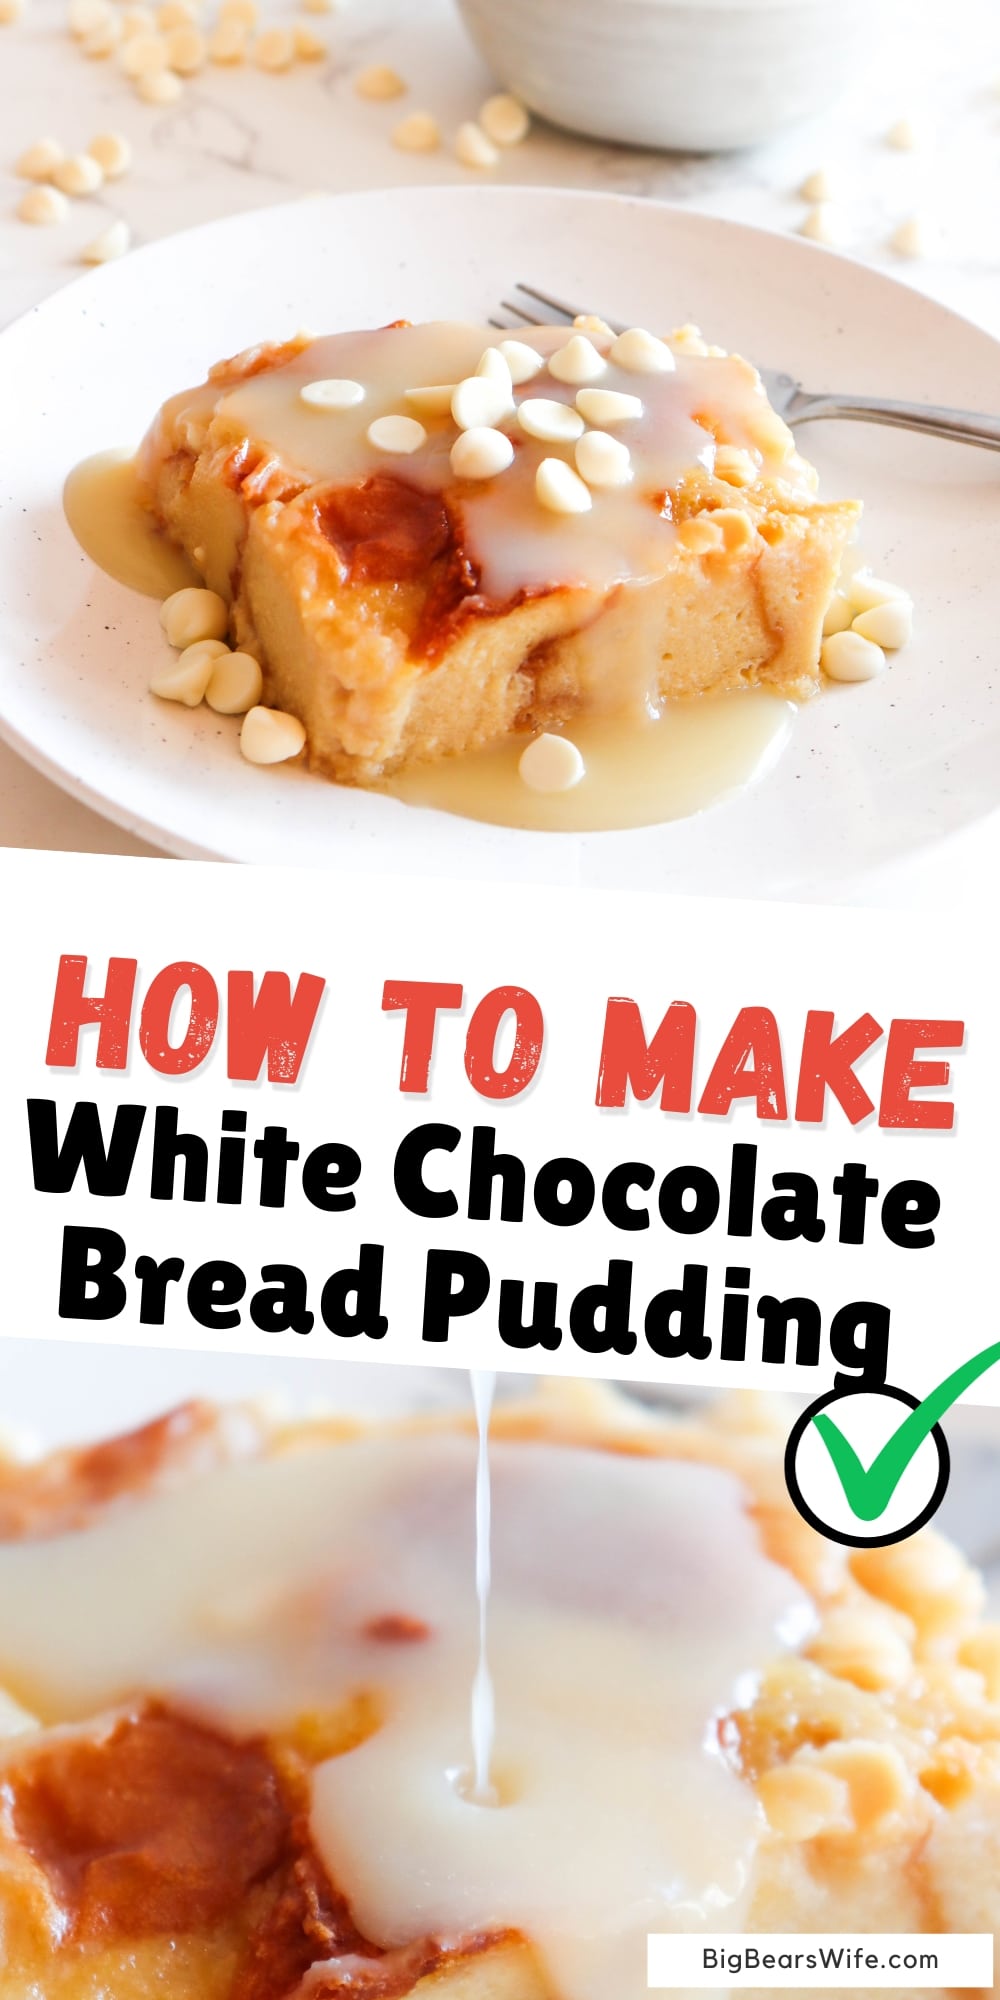 Indulge in the rich and velvety goodness of white chocolate bread pudding. Experience the ultimate comfort dessert with our heavenly white chocolate bread pudding. This soul-warming treat combines the nostalgic goodness of bread pudding with the velvety sweetness of white chocolate via @bigbearswife